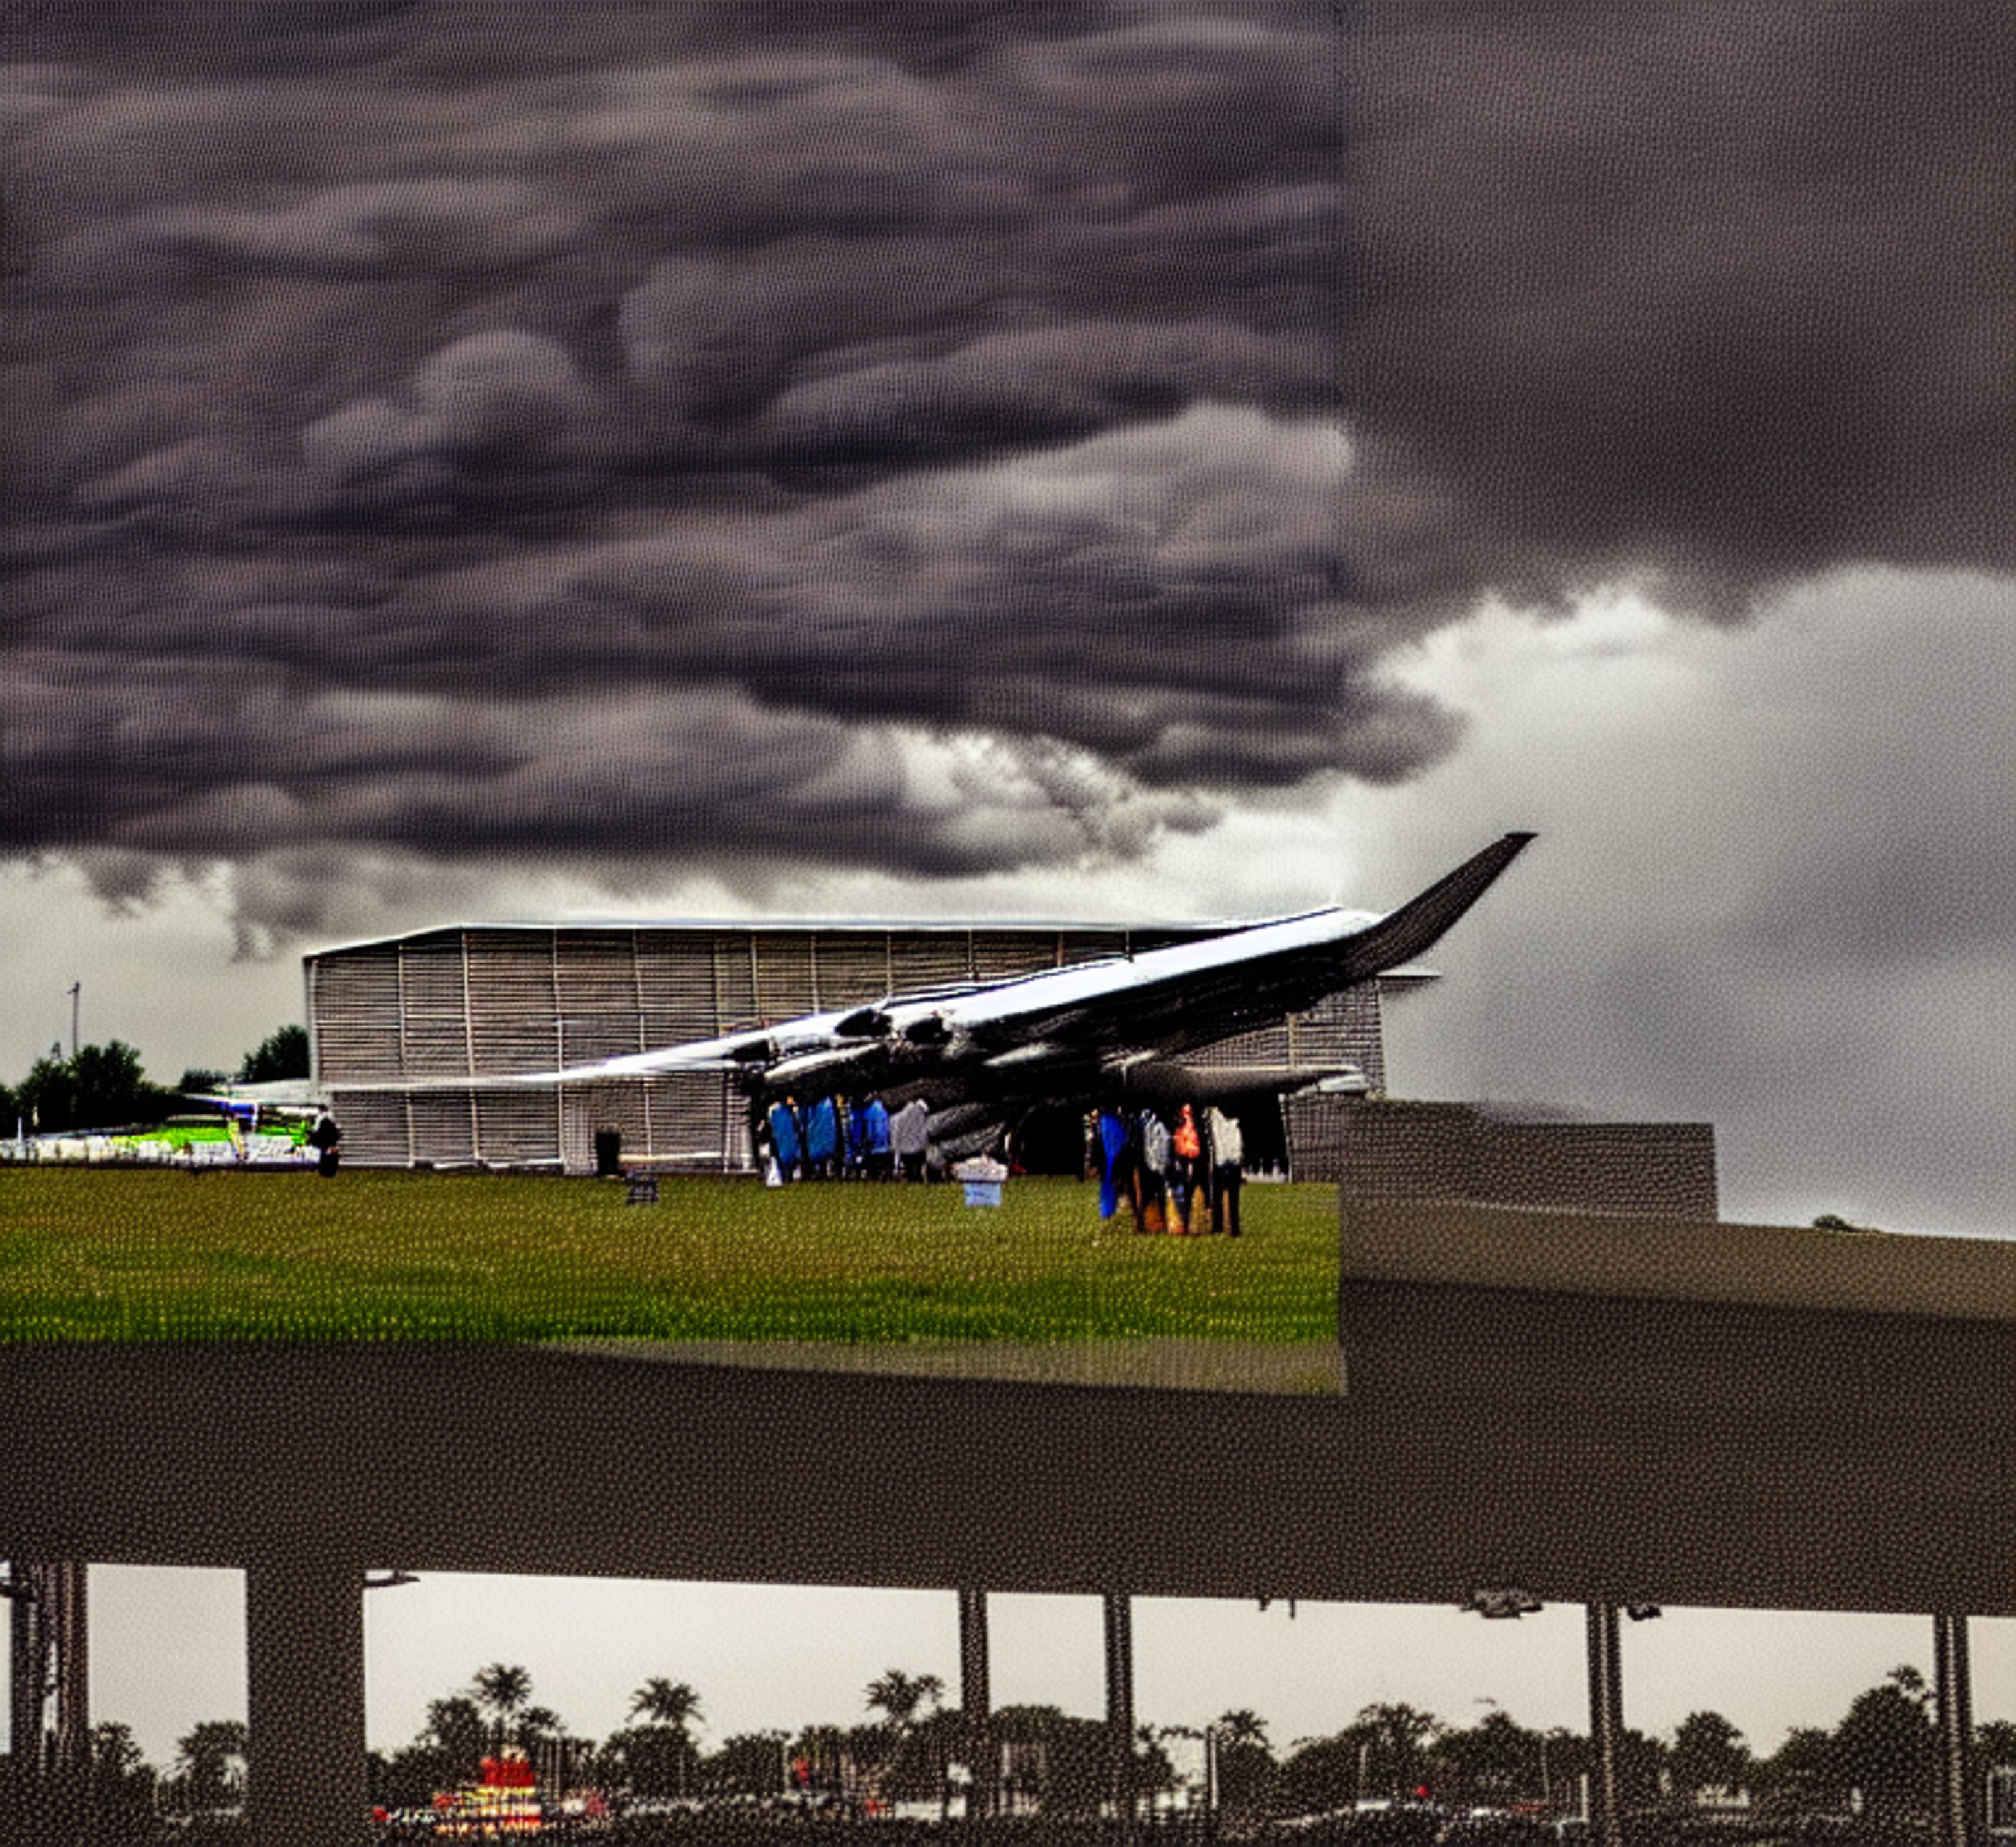 massive_art_fair_structure_being_hit_by_a_storm_with_airplanes_in_the_distance_landing_and_taking_off_from_an_airportpng